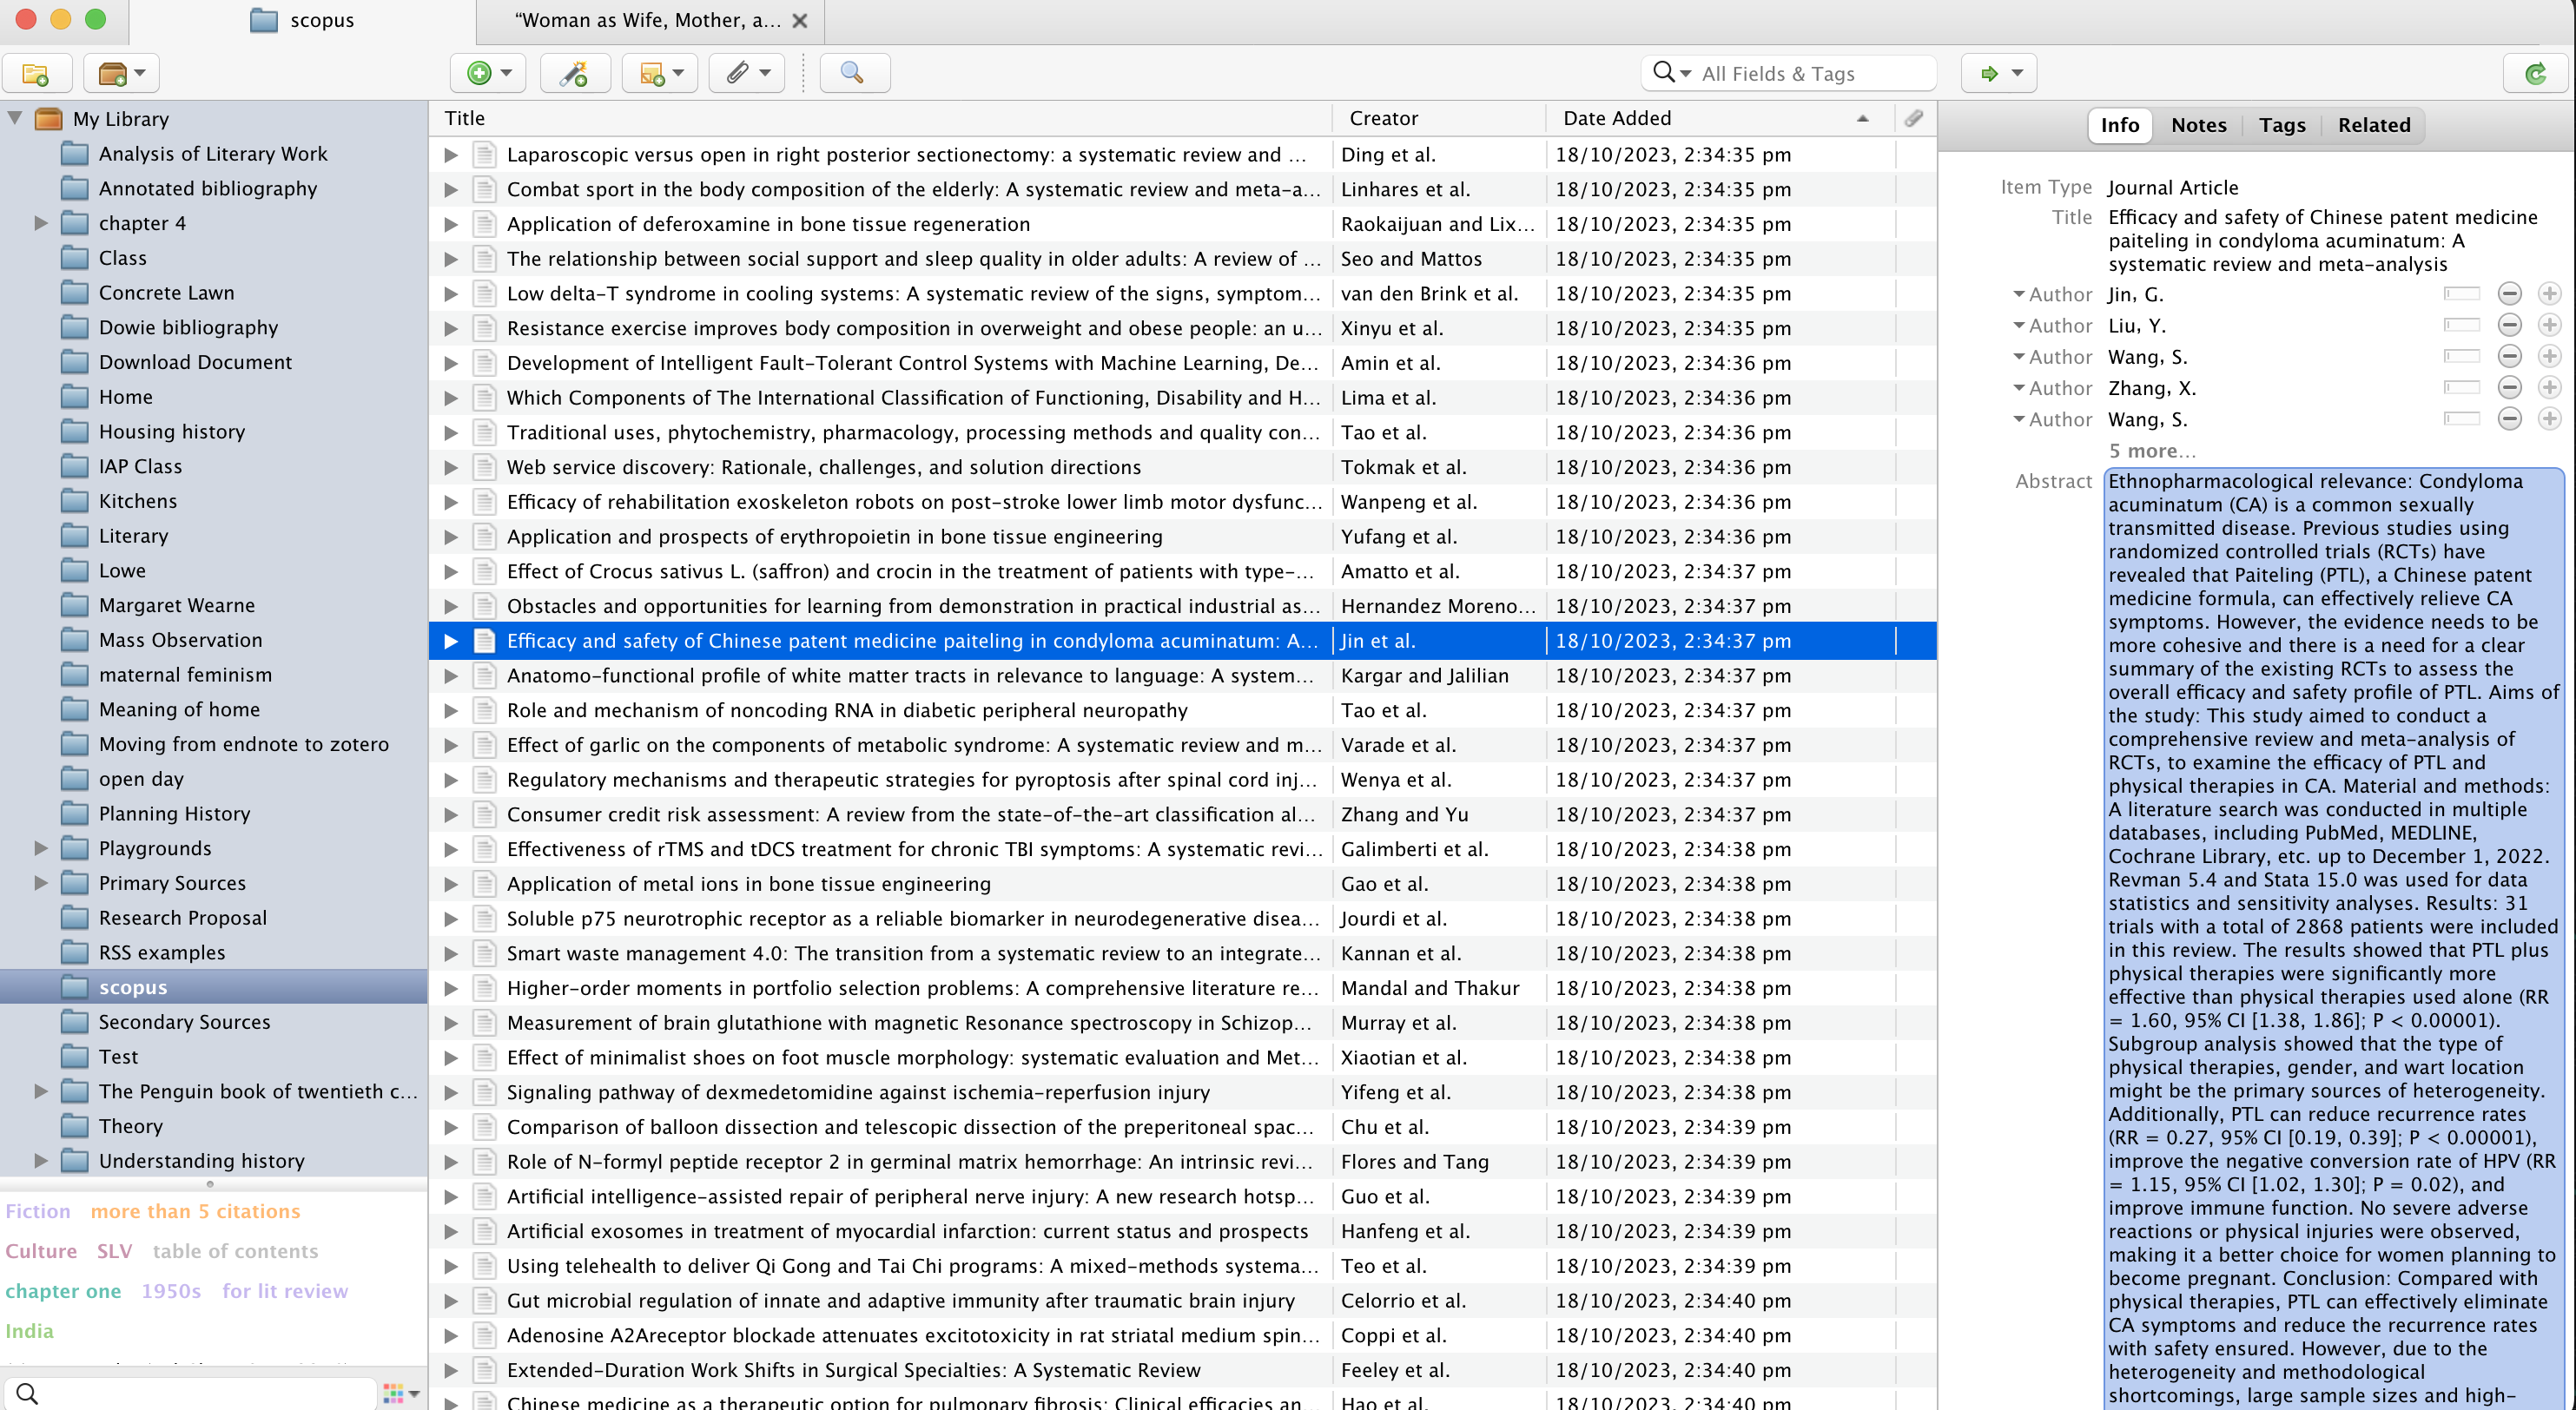 screenshot of a Zotero record with abstract for screening